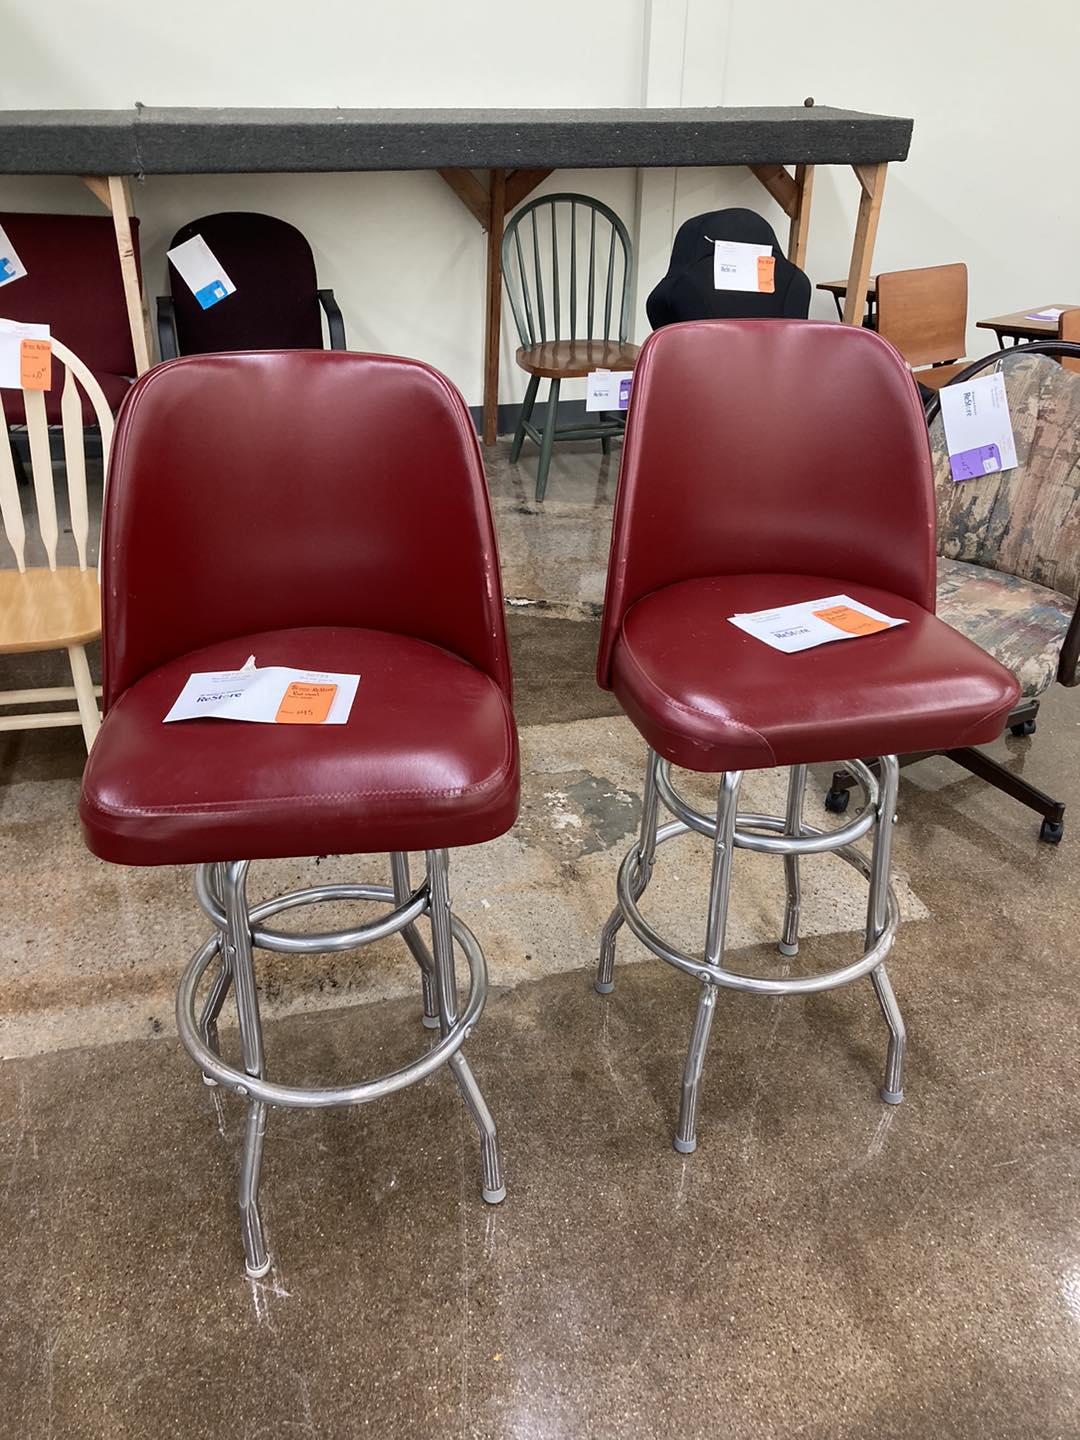 Two hi-top chairs. They are dark red vinyl with stainless steel bases. 